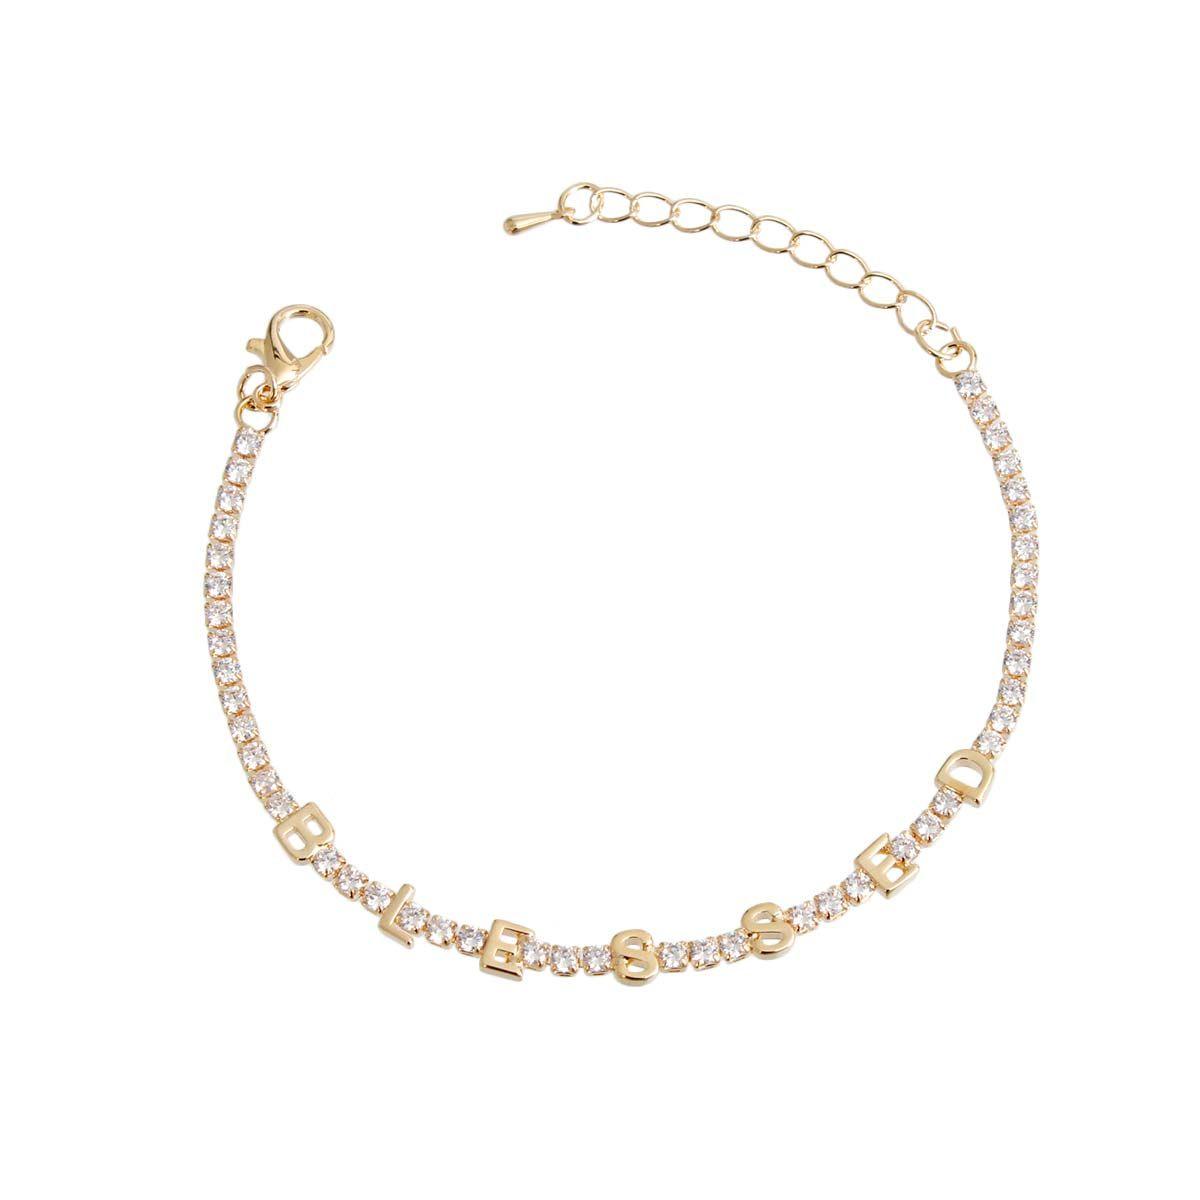 Enhances Your Favorite Outfits BLESSED Tennis Bracelet Gold Plated